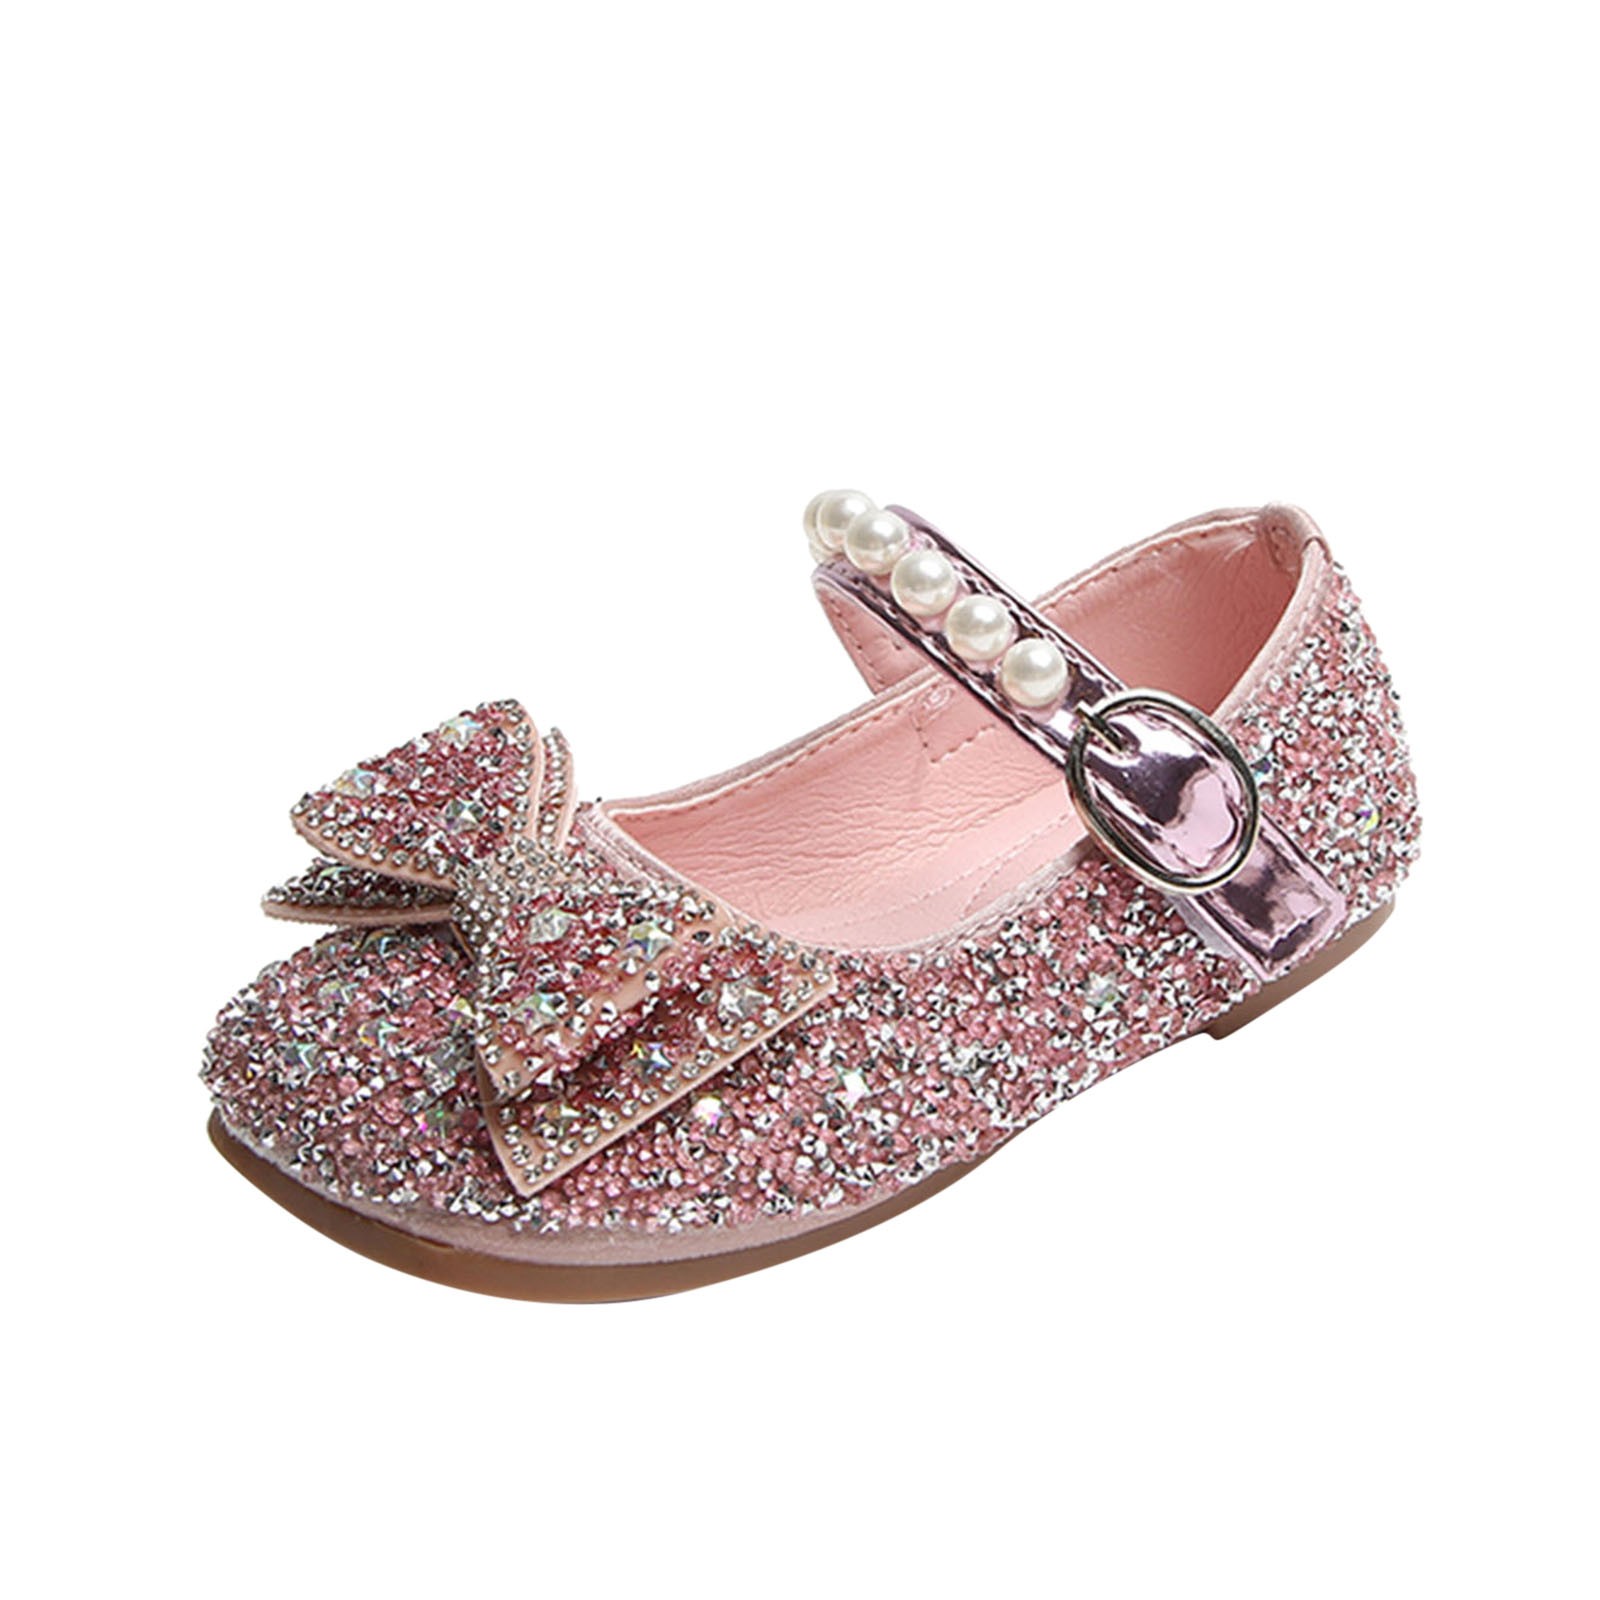 JDEFEG Girl Boots Size 10 Fashion Autumn Girls Casual Shoes Rhinestone Sequin Bow Buckle Dress Shoes Dance Shoes Girls Rain Shoes Pu Pink 23 - image 1 of 5